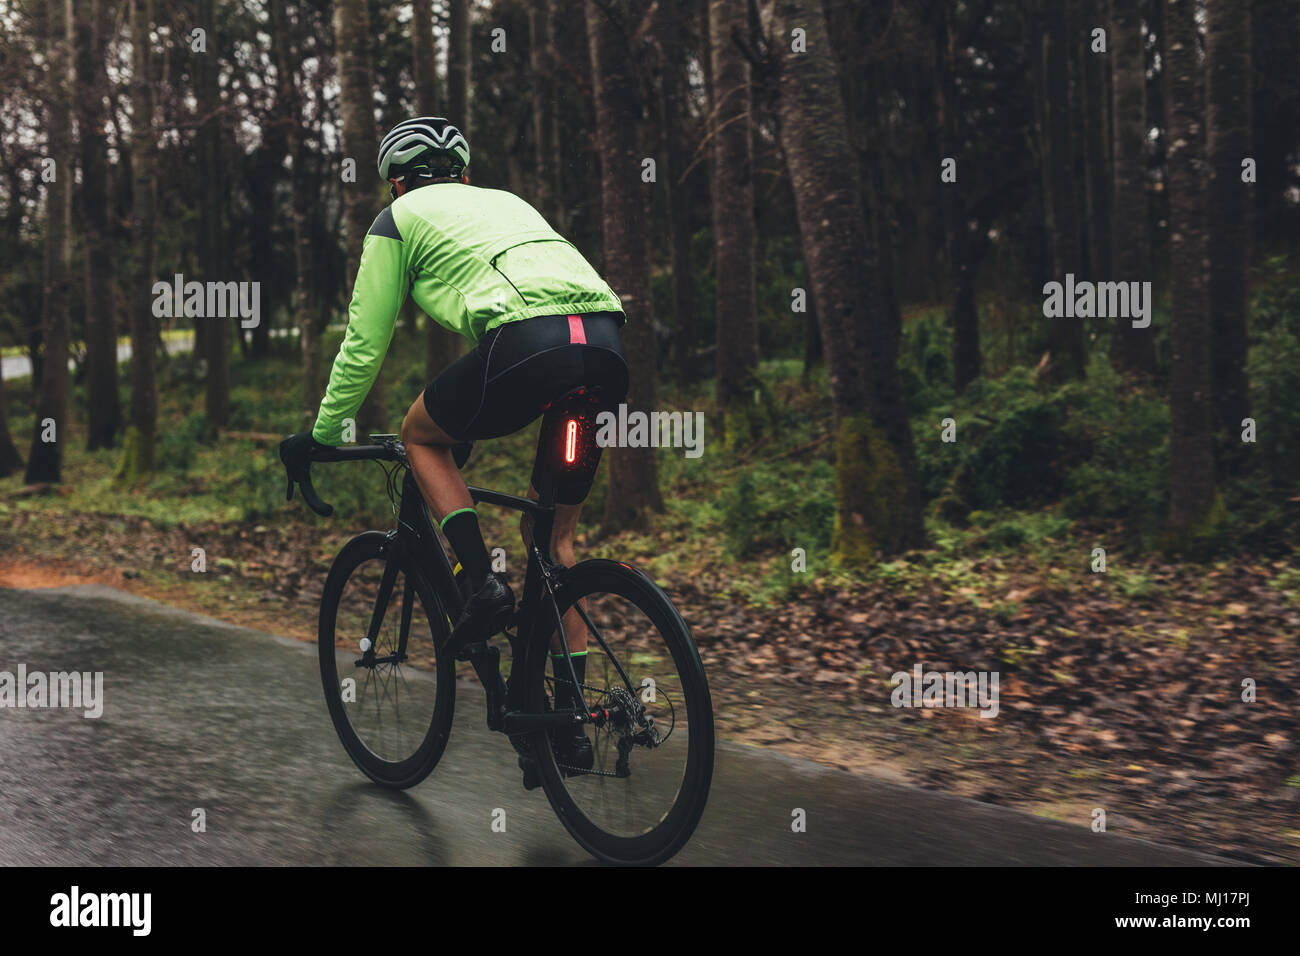 Male cyclist on a country road training for competition. Man riding bicycle on wet road through forest. Stock Photo